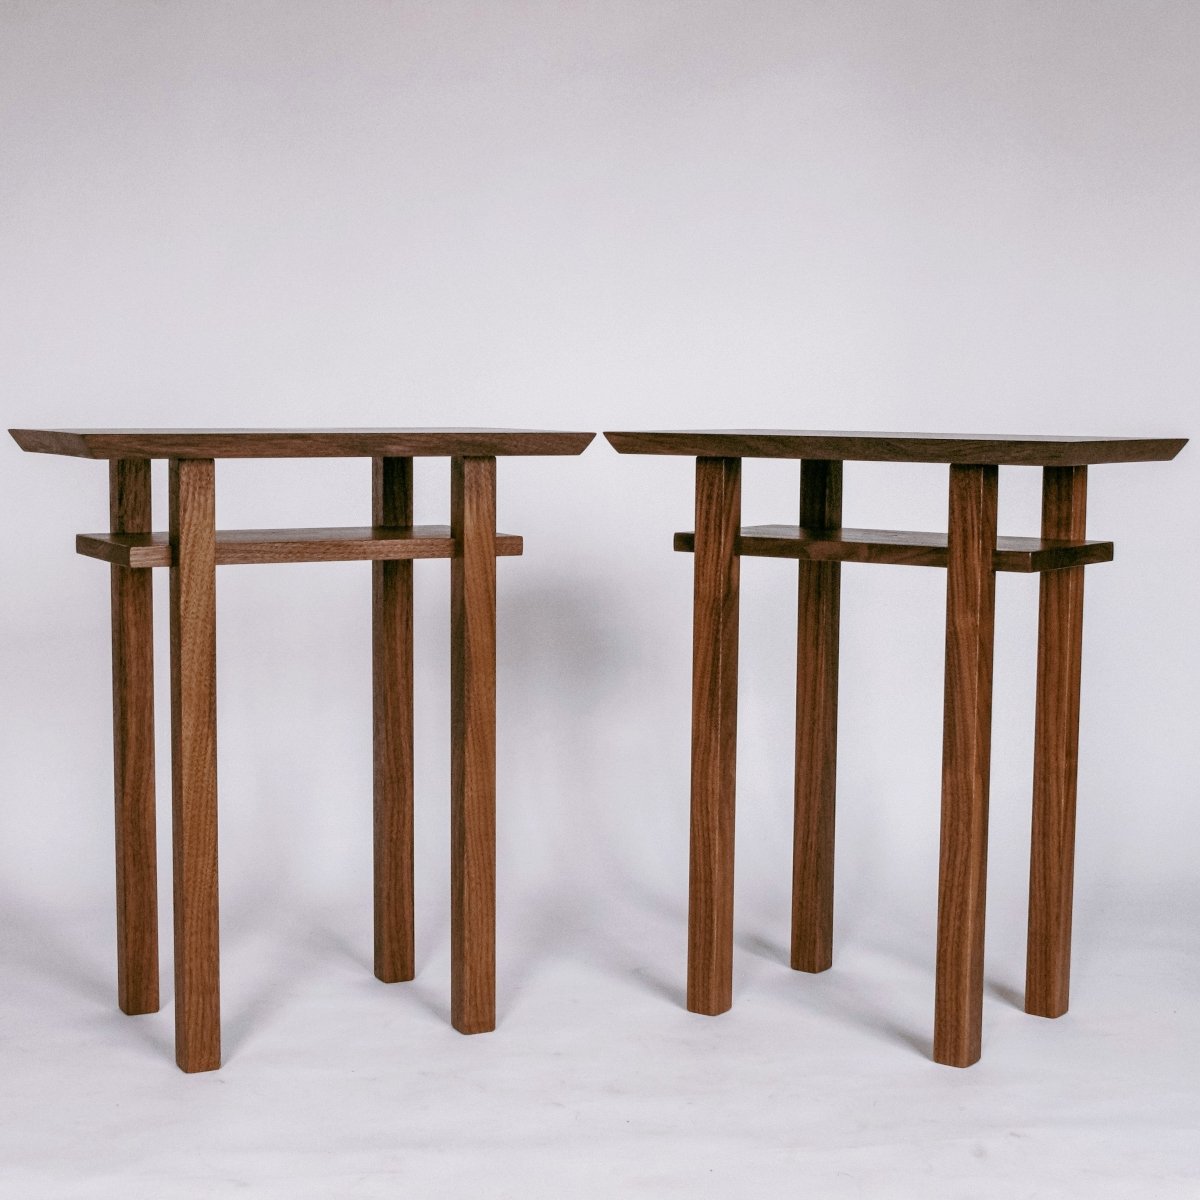 a pair of small end tables handmade from solid walnut